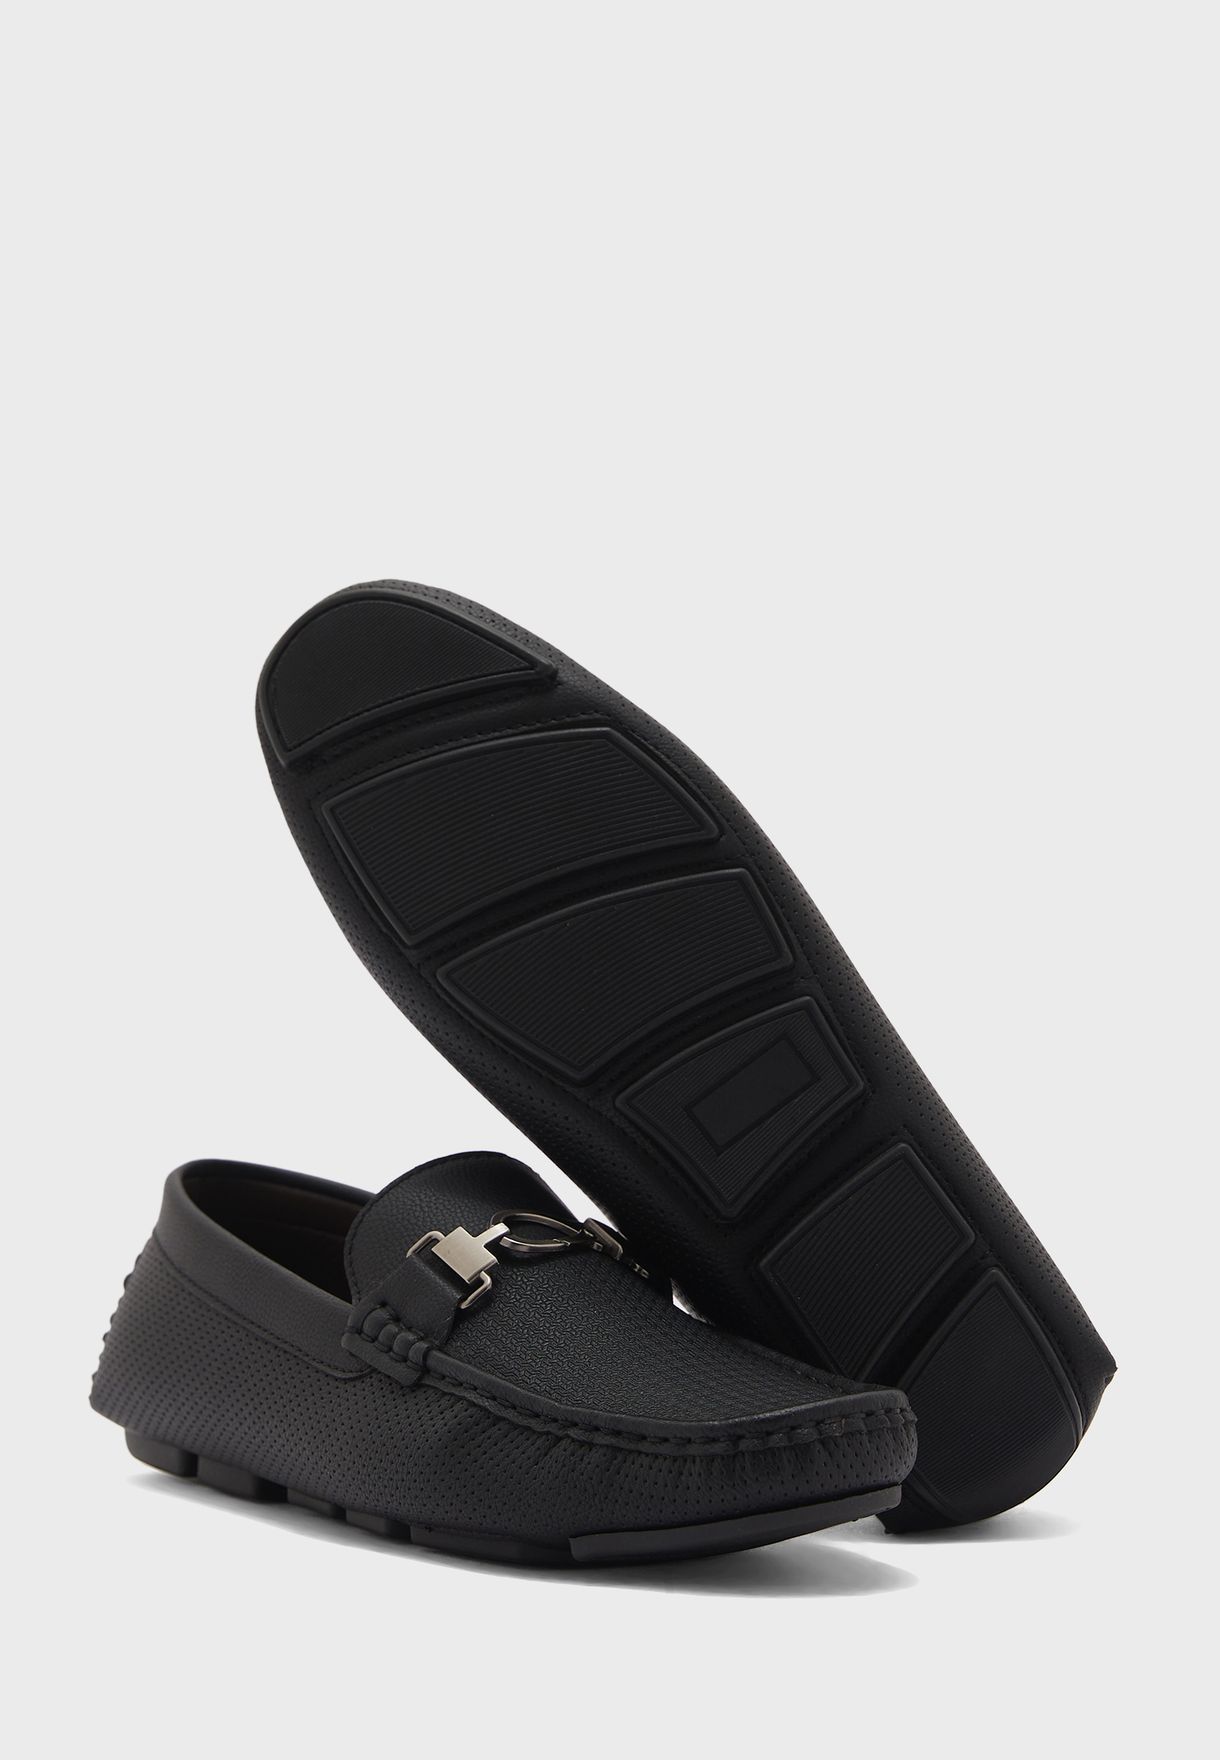 Perforated Loafers